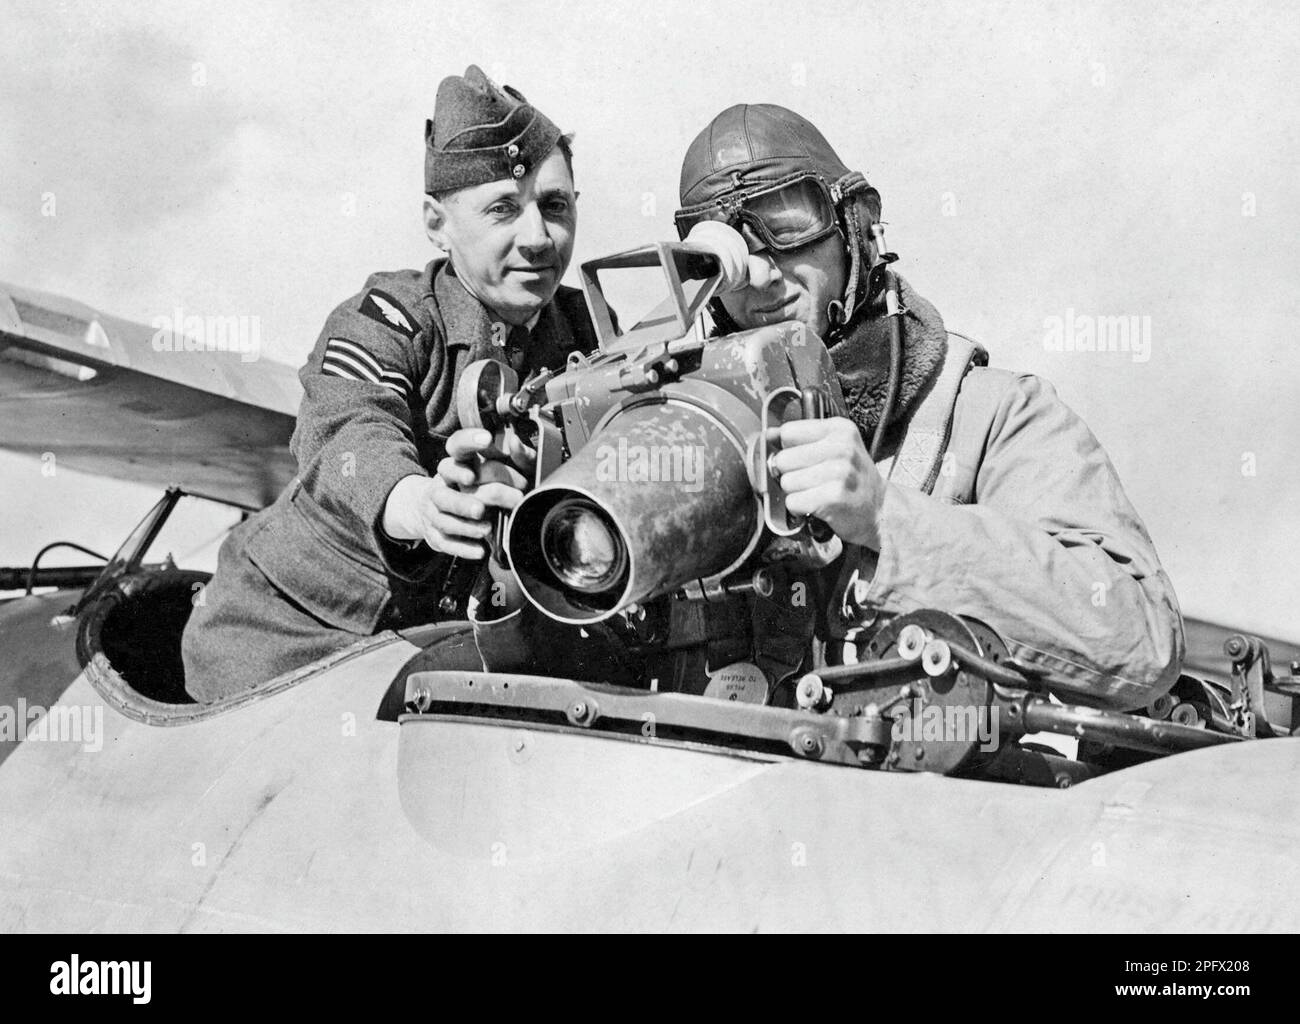 In the 1930s. A crewmember of a military airplane with a soldier at a camera mounted on the airplane. The camera might be new and some guidence in how to operate it is needed. The man dressed in a flying suit is using the sight and focus on something. England 1939 Stock Photo